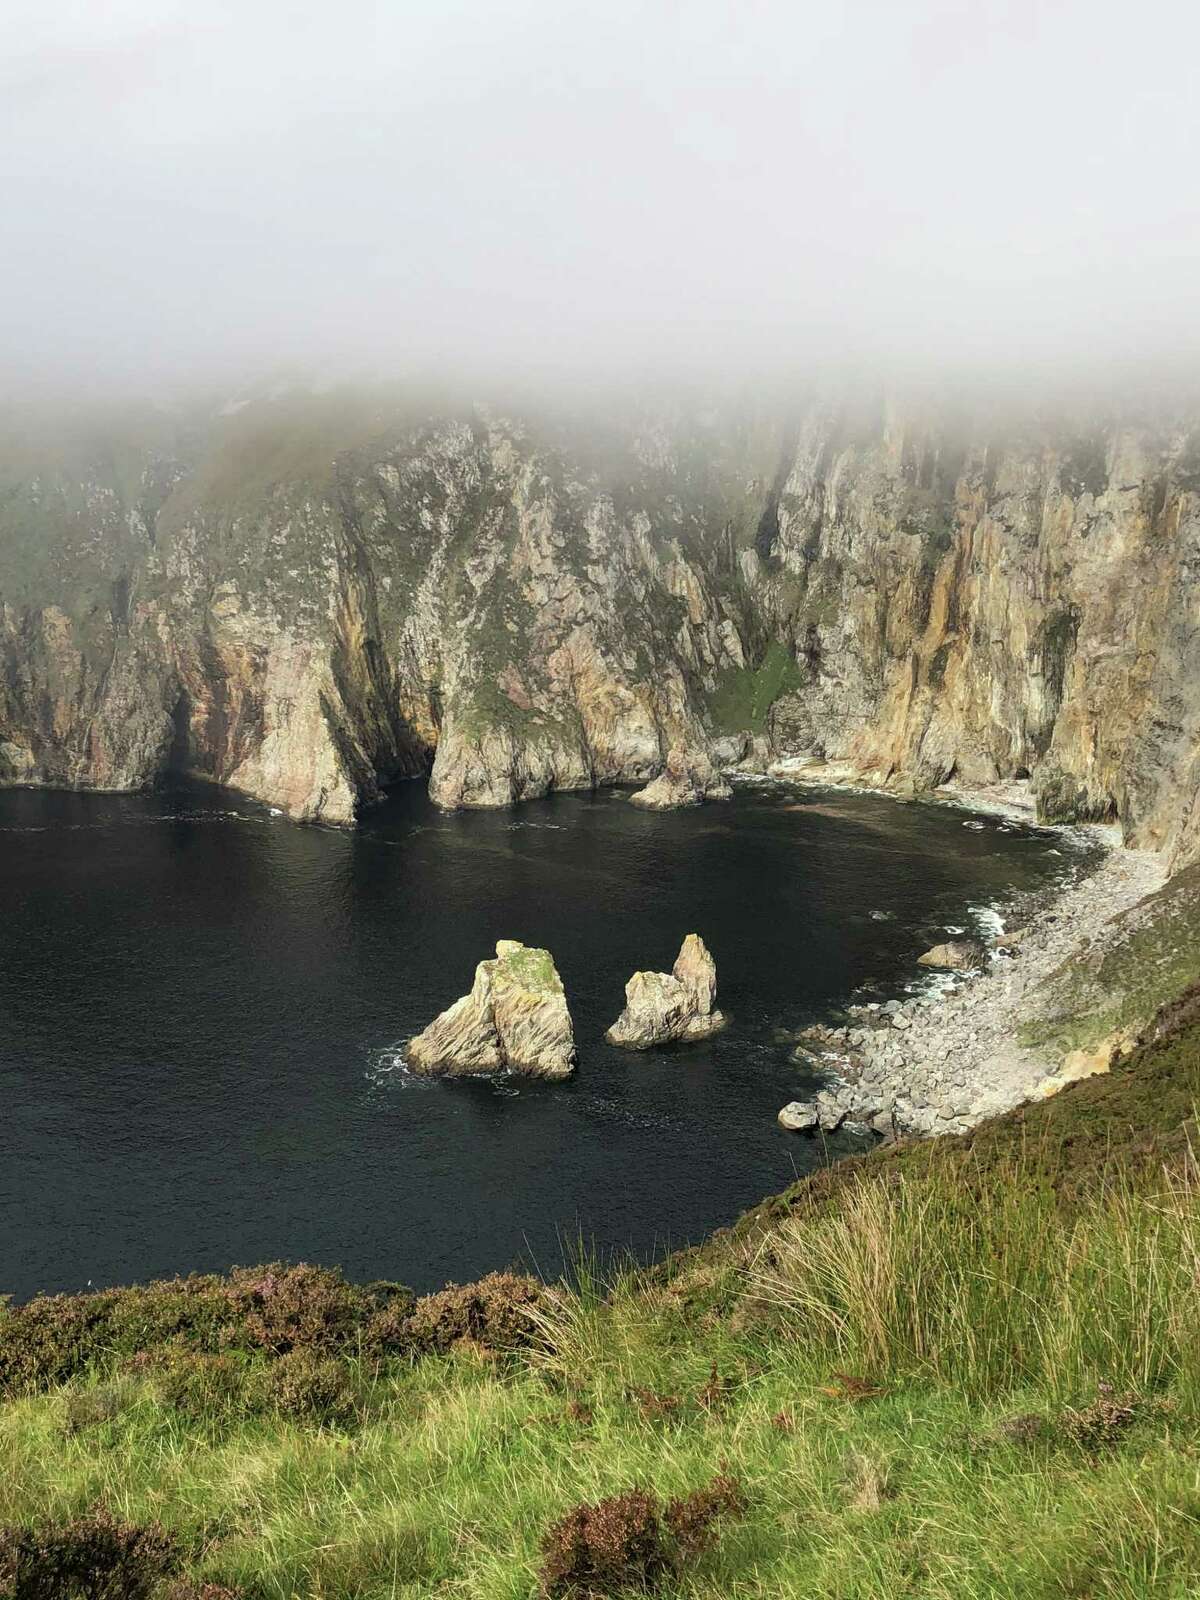 Clifton Park resident Janice Jaskolka Golden visited Ireland in late August. Among the sites she saw were the Slieve League Cliffs in Donegal, the northernmost part of the country, north of William Butler Yeats' hometown of Sligo. They are the highest cliffs in Europe.